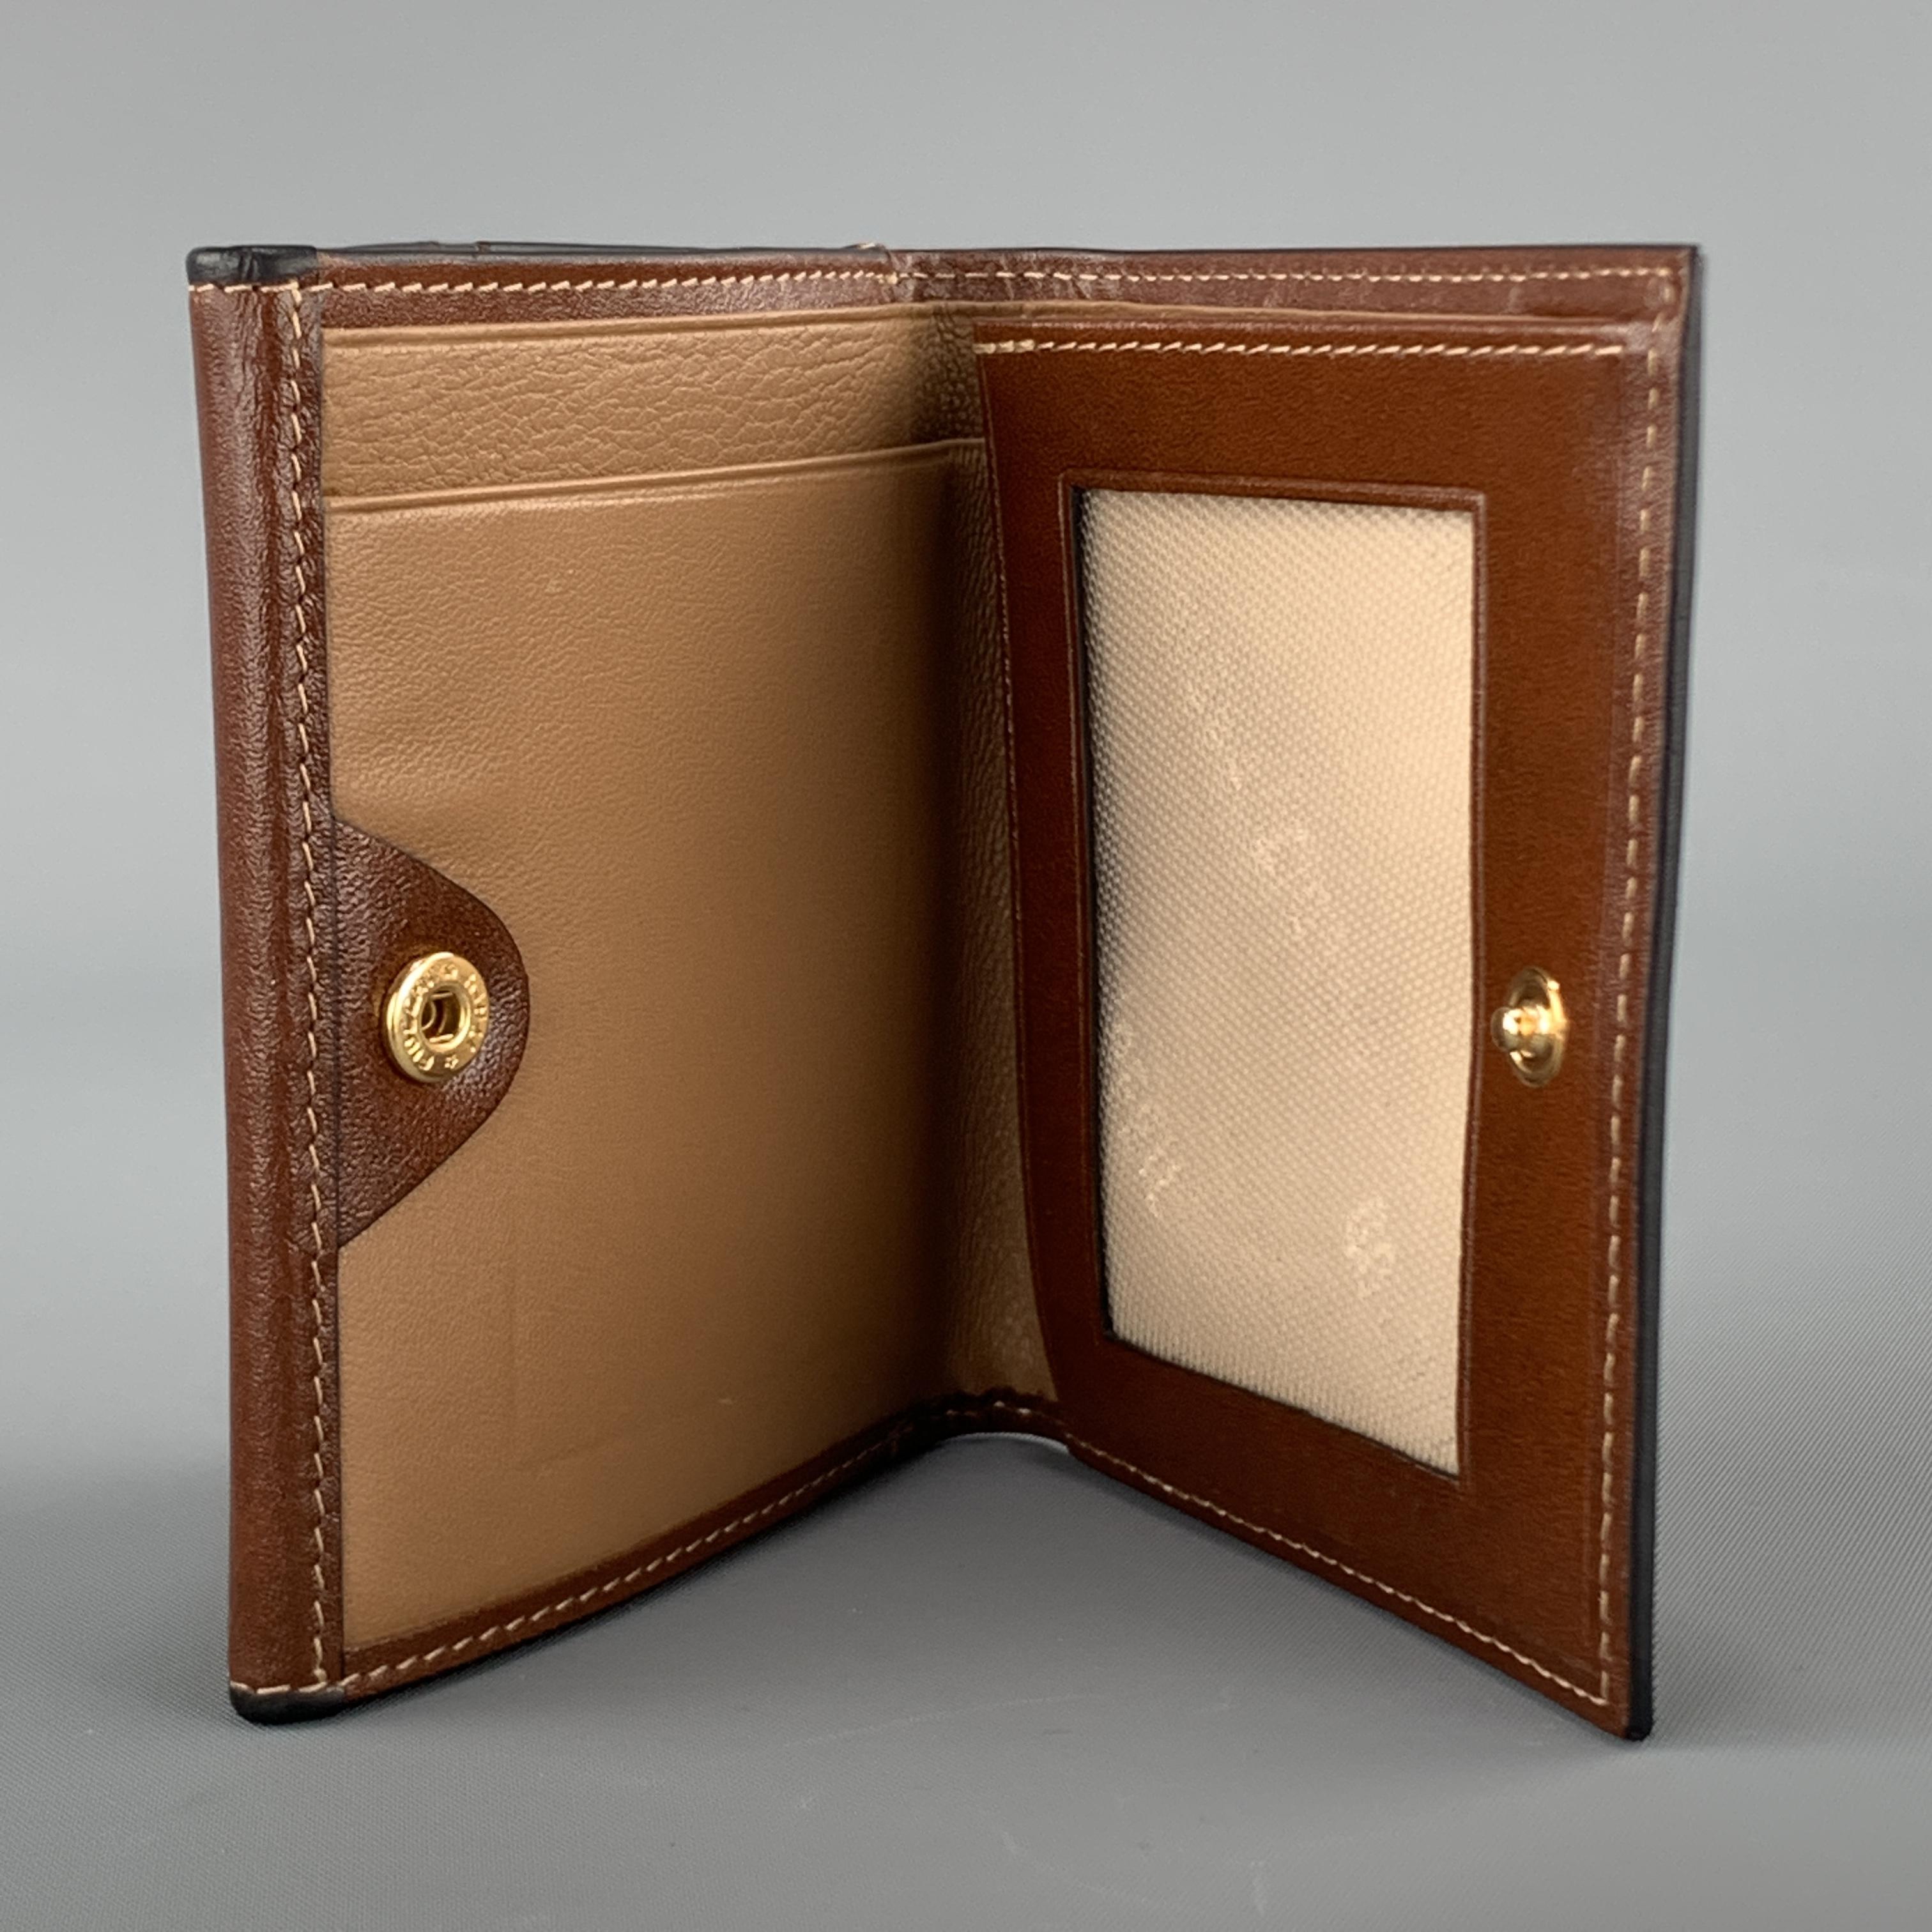 GOLDPFIEL travel wallet comes in tan brown leather with card slots, money compartment, and slot for passport. 

Excellent Pre-Owned Condition.

5.75 x 4.25 in.